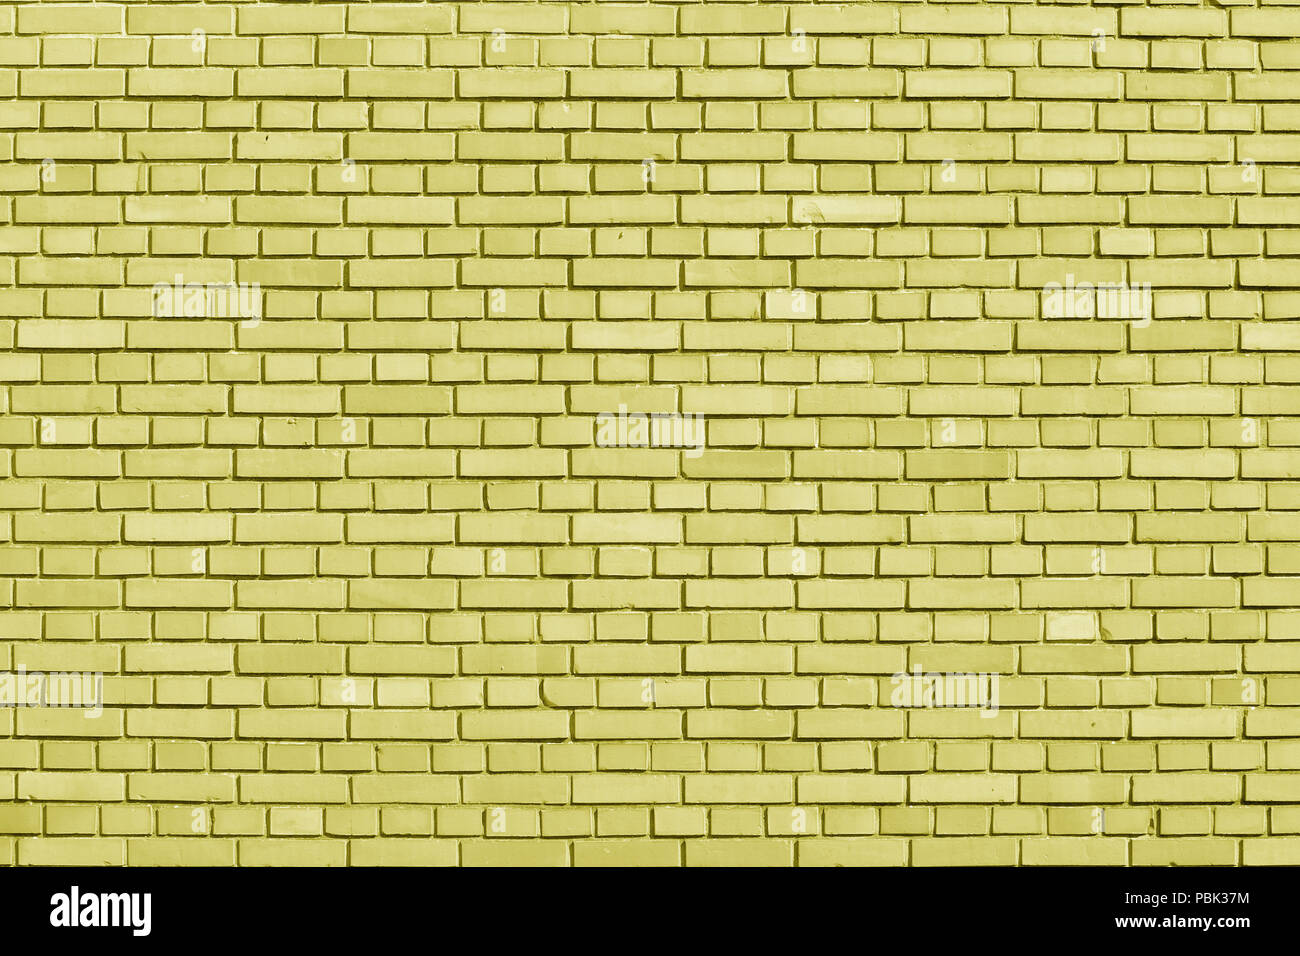 Limelight colored brick wall background Stock Photo